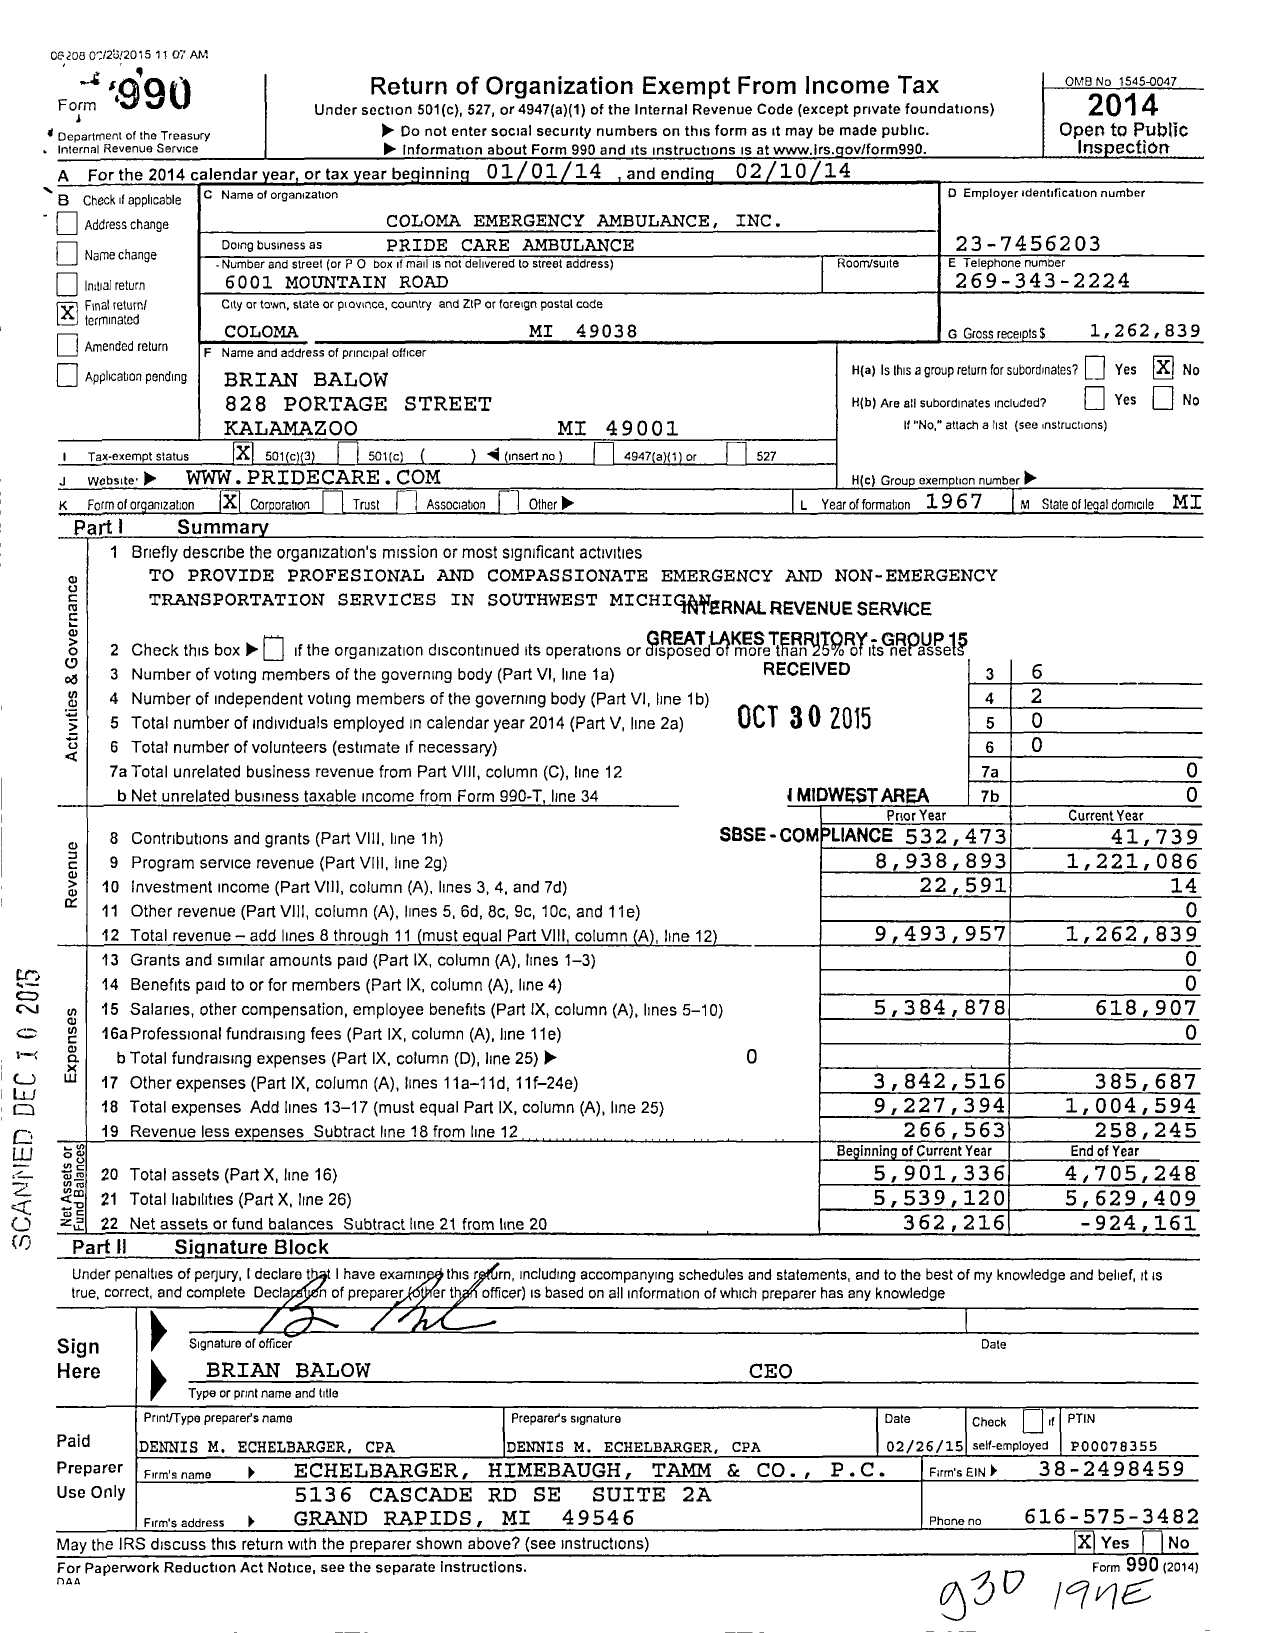 Image of first page of 2013 Form 990 for Coloma Emergency Ambulance